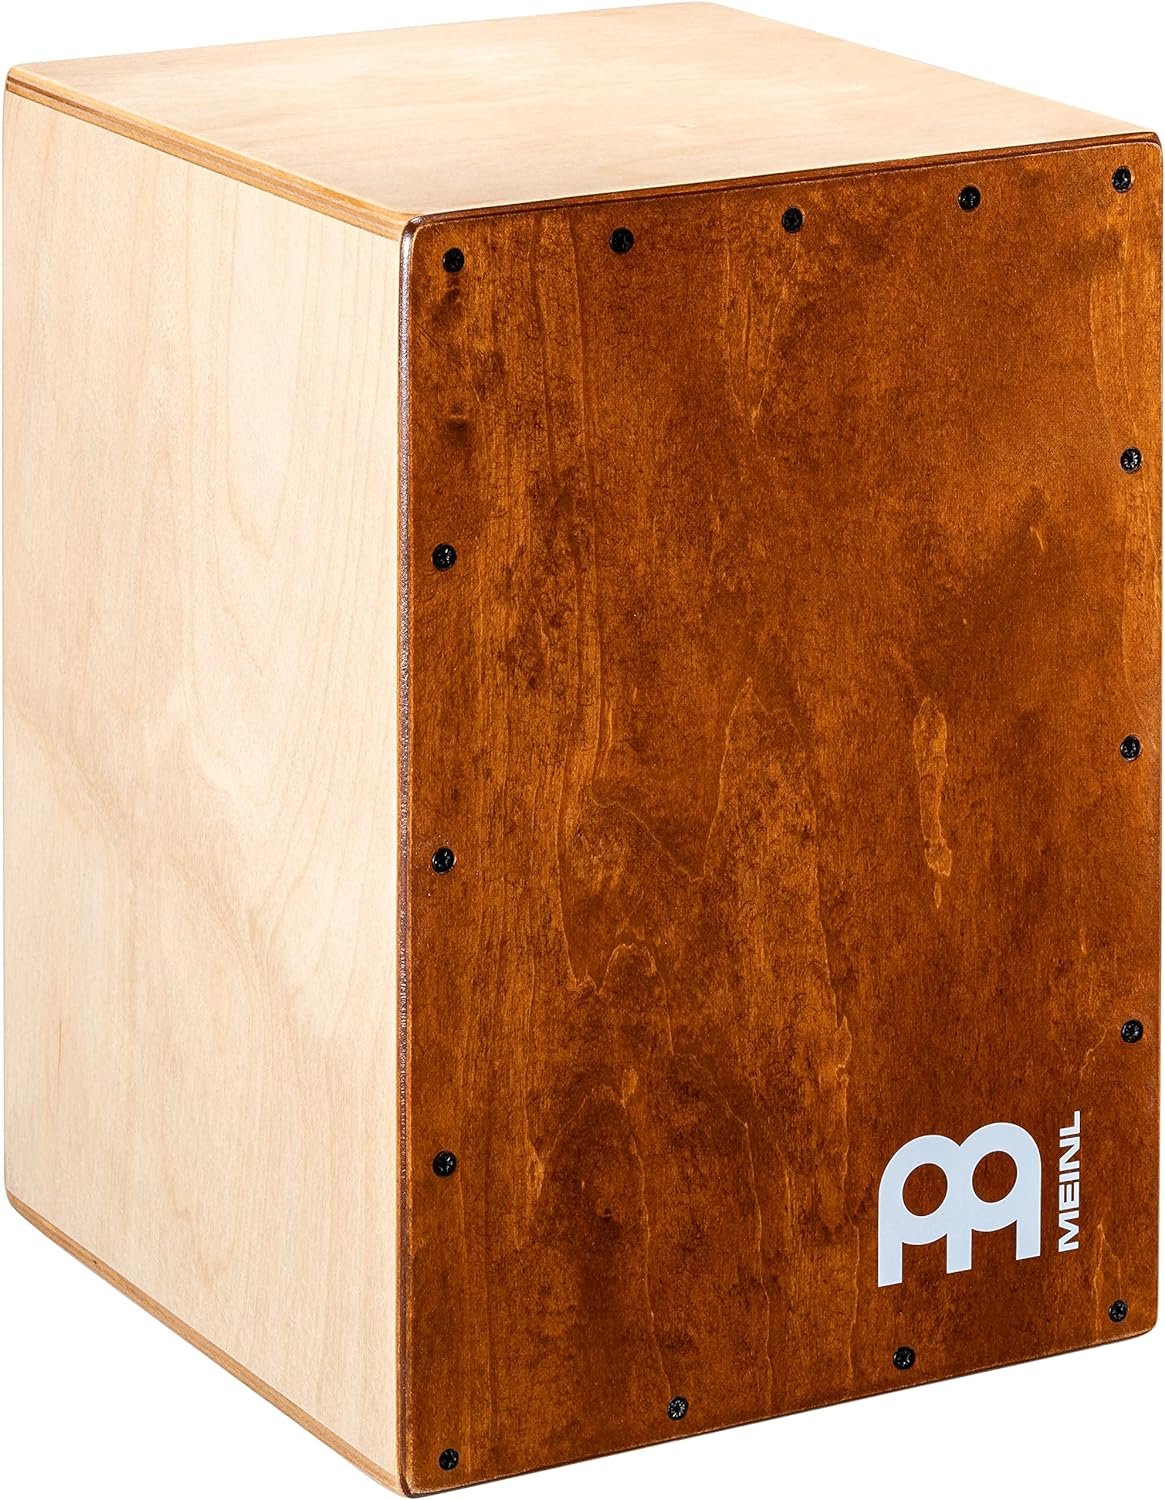 Meinl Percussion Jam Cajon Box Drum with Snare and Bass Tone for Acoustic Music — Made in Europe — Baltic Birch Wood, Play with Your Hands, 2-Year Warranty (JC50LBNT)